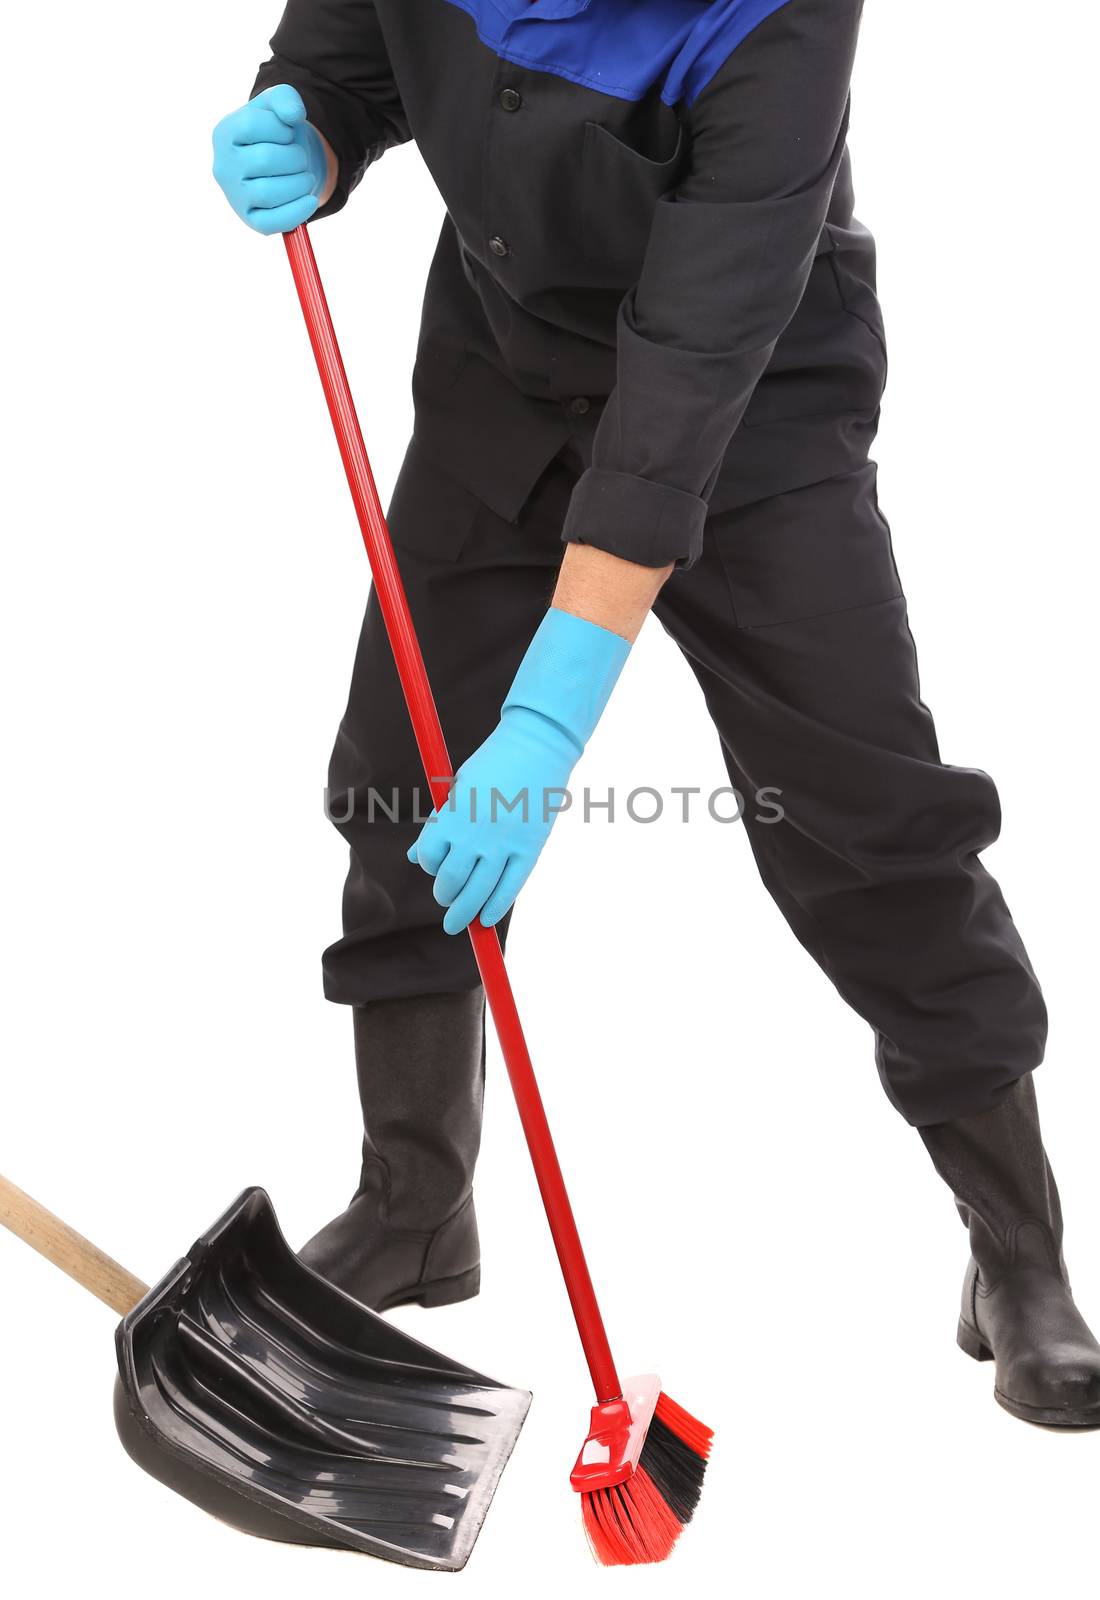 Worker sweeping floor. Isolated on a white background.